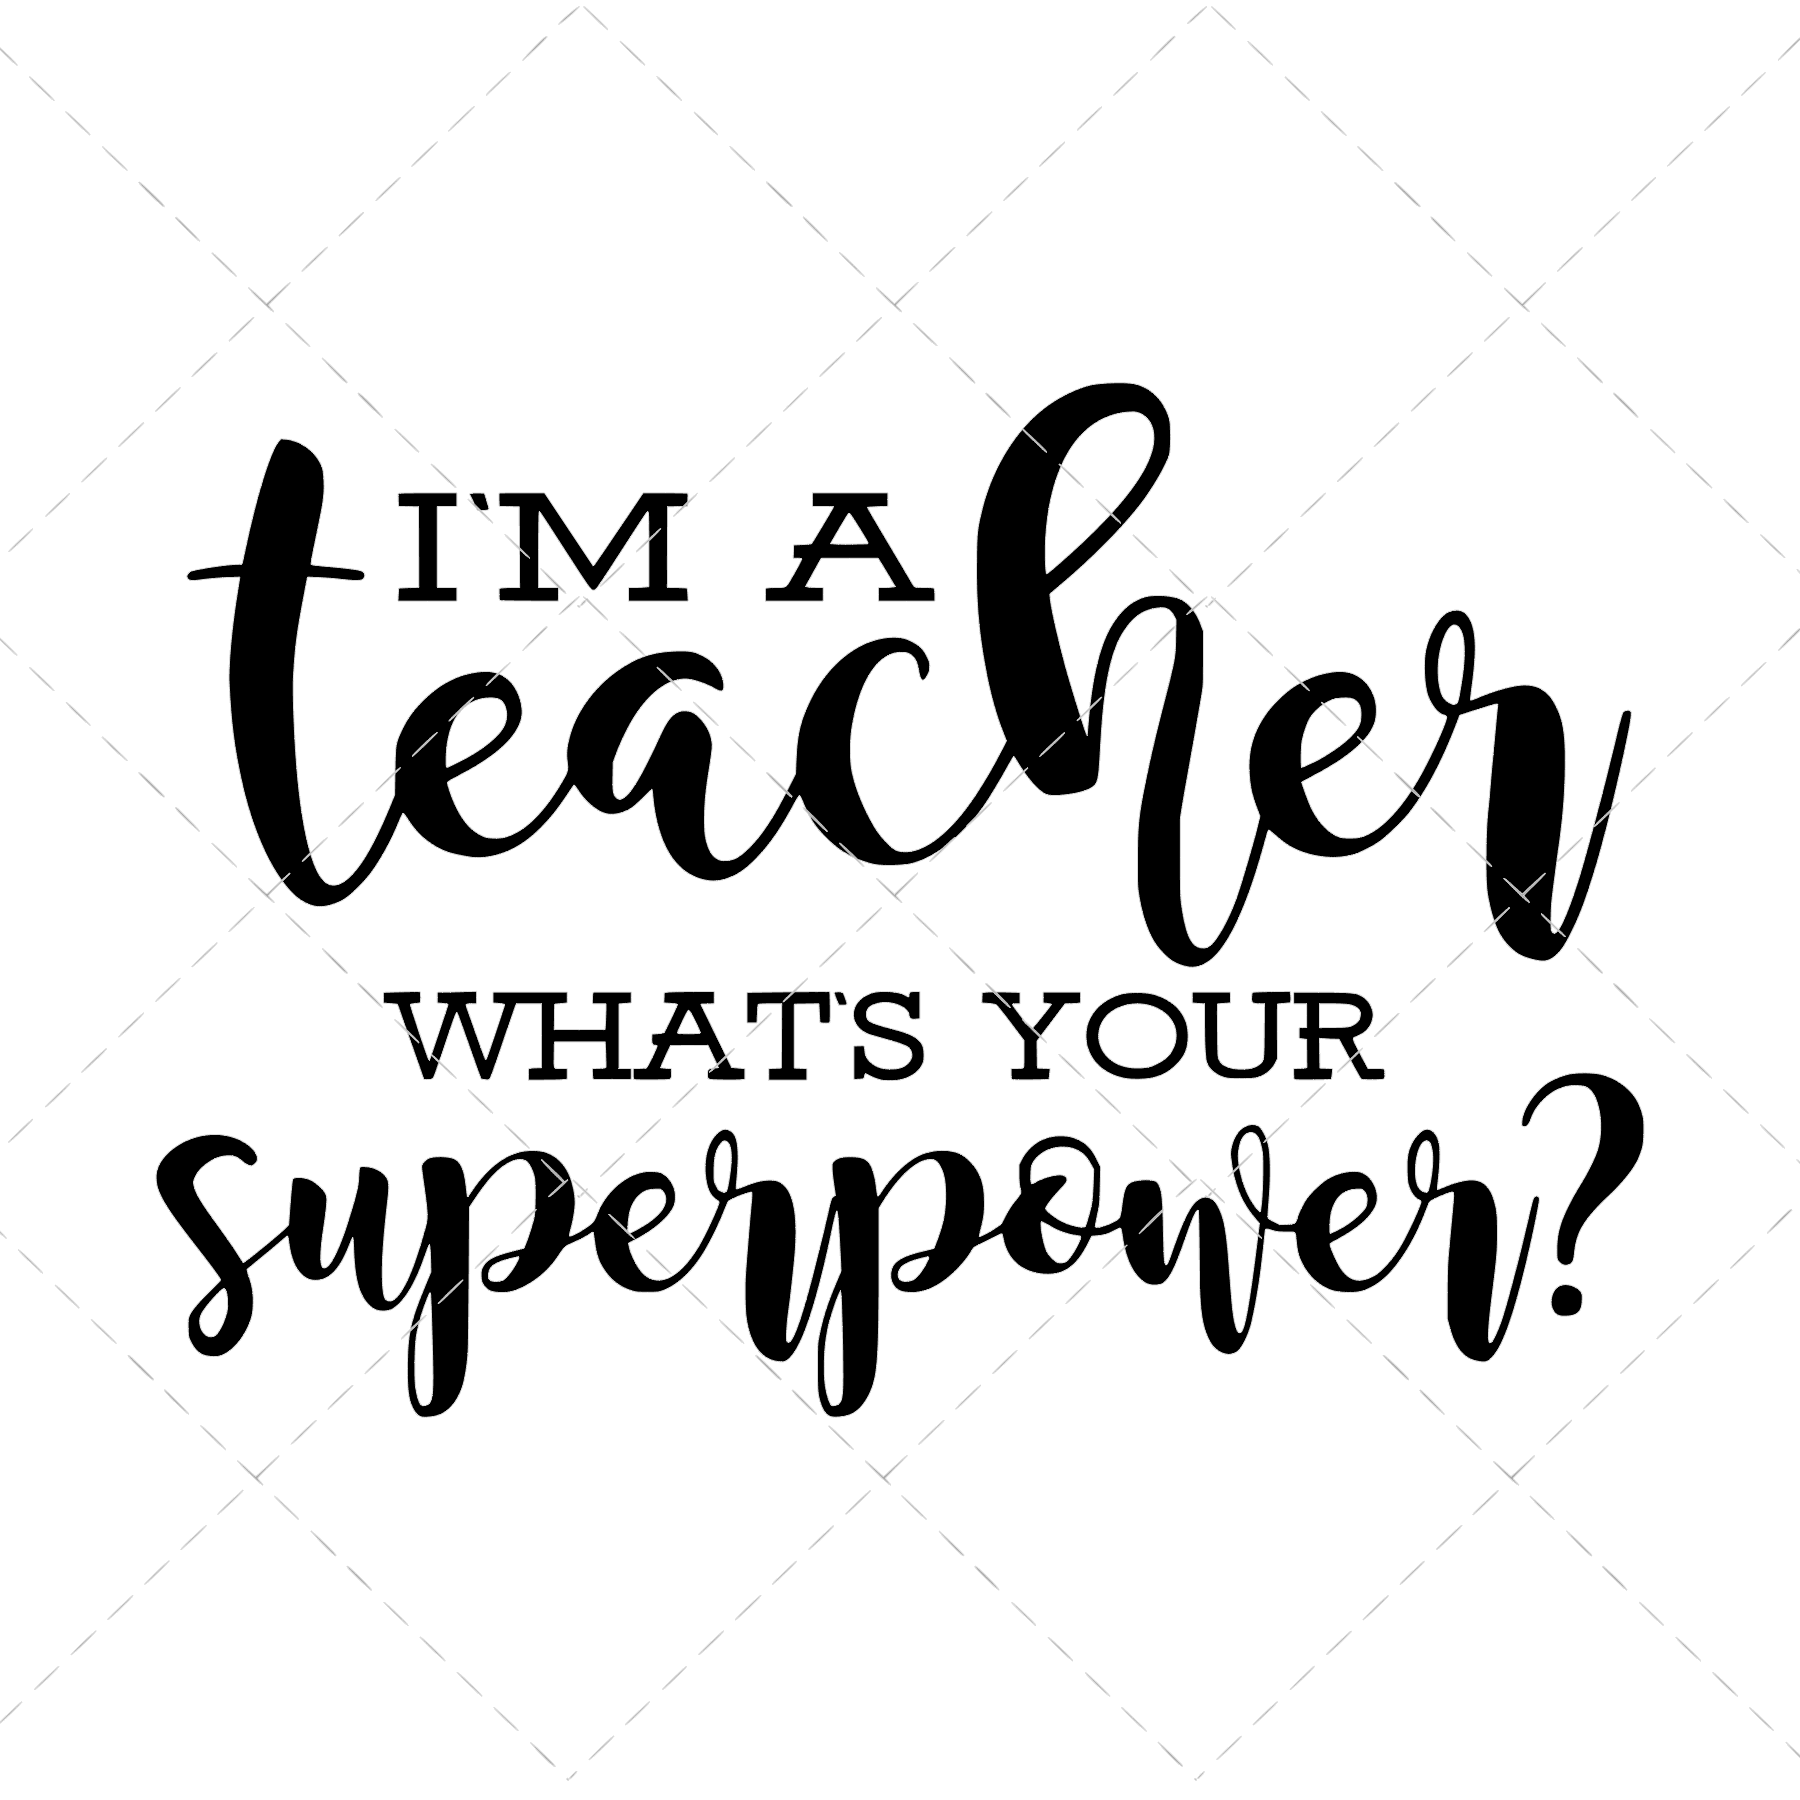 I'm a Teacher, What's Your Superpower Graphic by rajjdesign